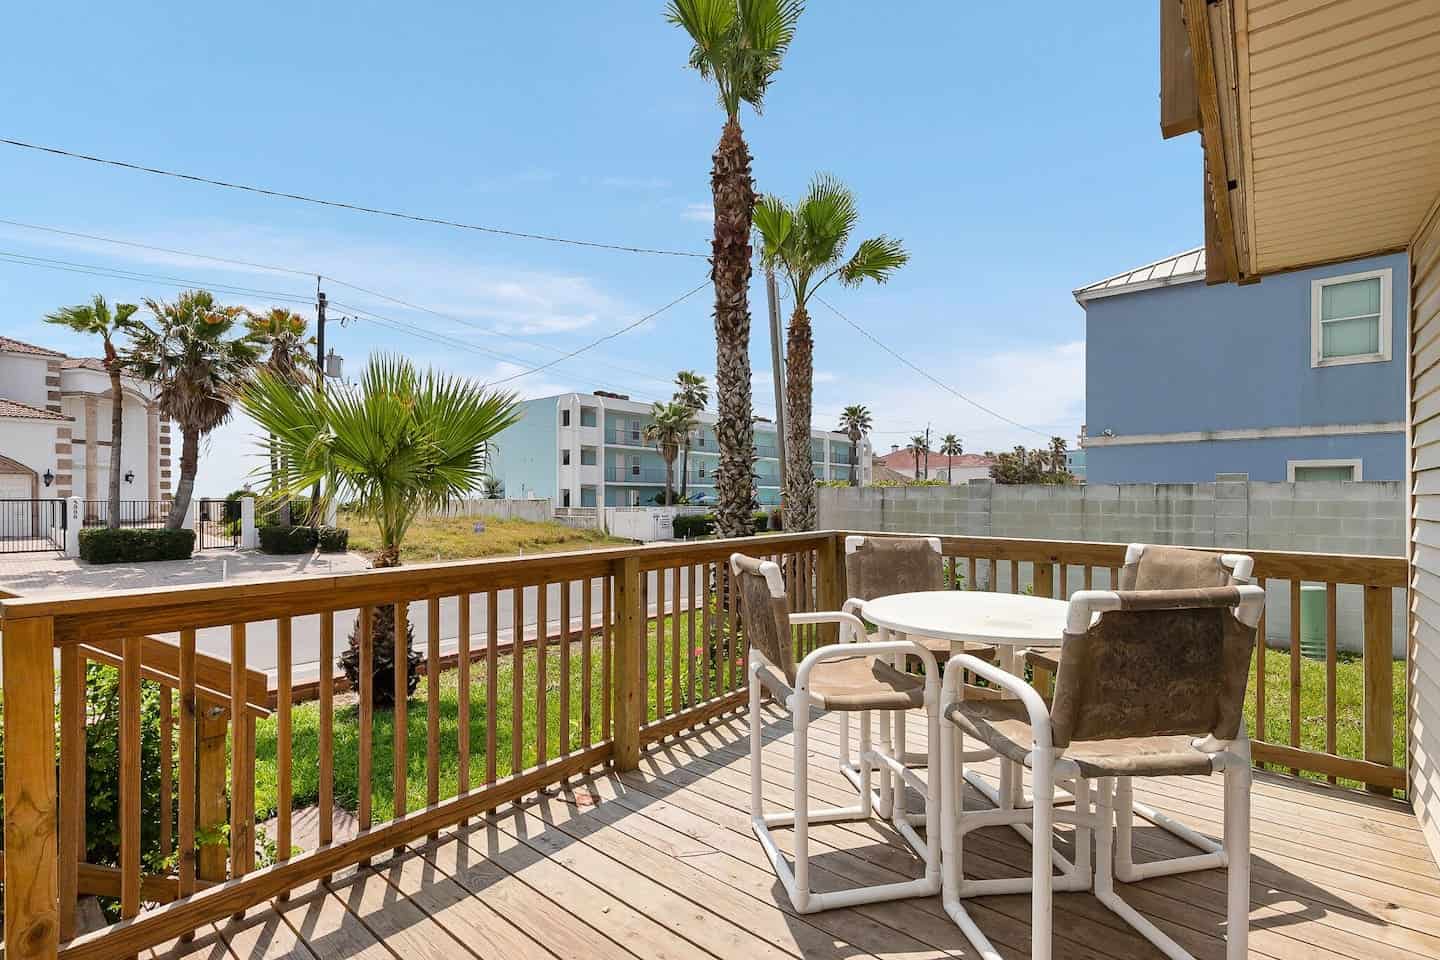 Image of Airbnb rental in South Padre, Texas